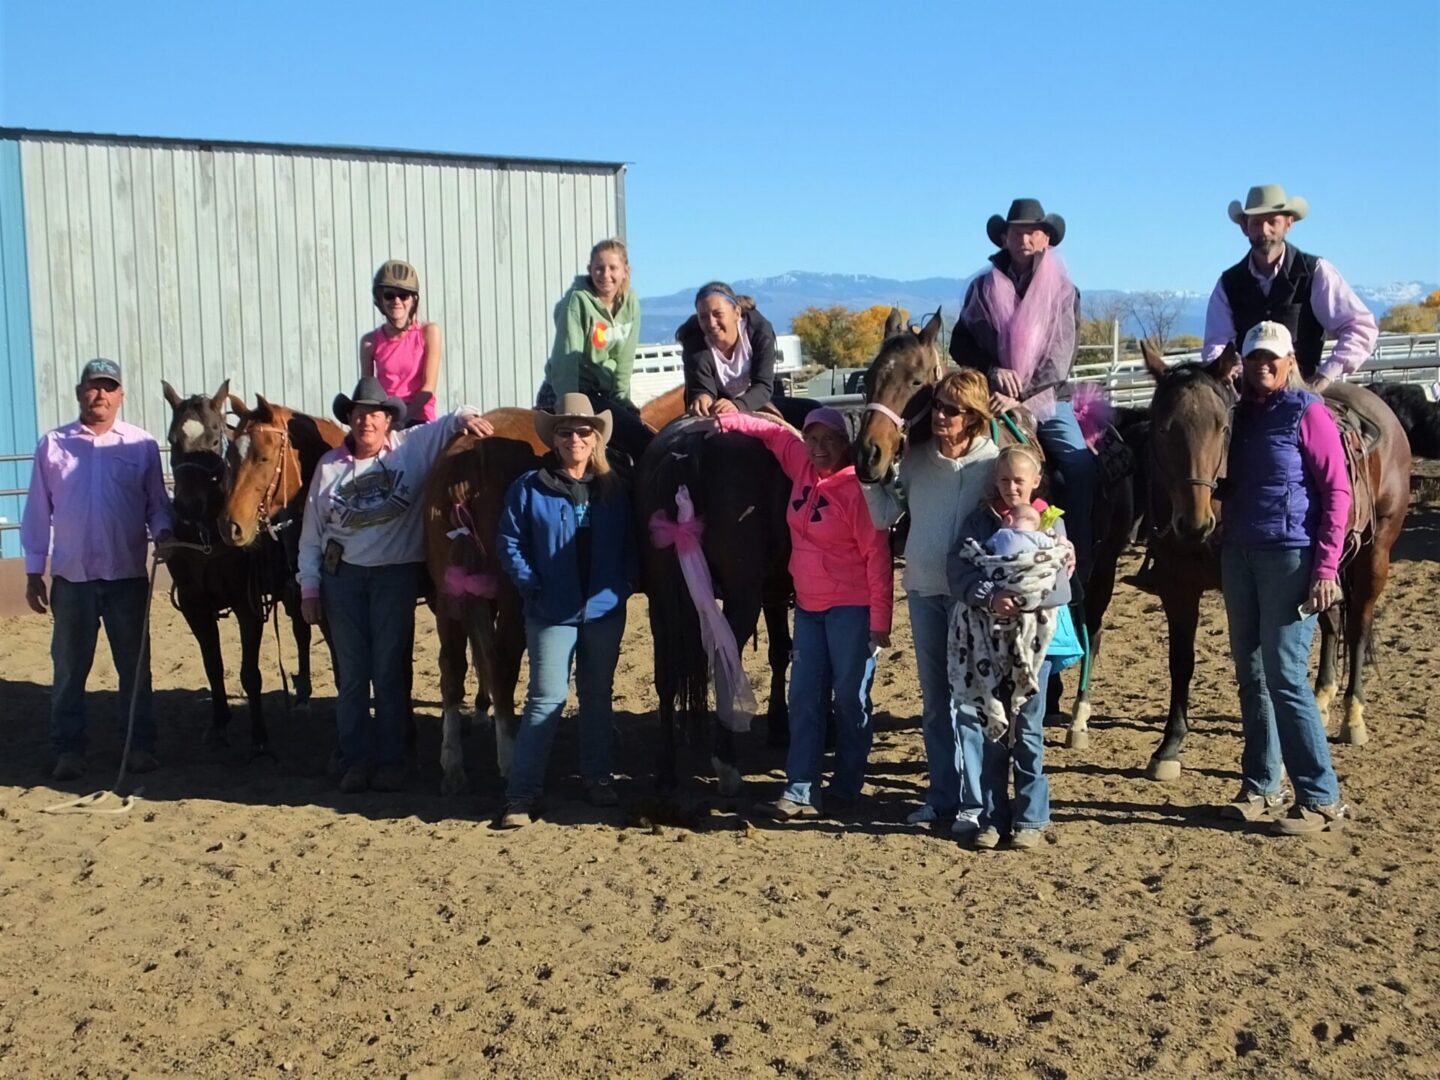 A group of people standing around horses on dirt.